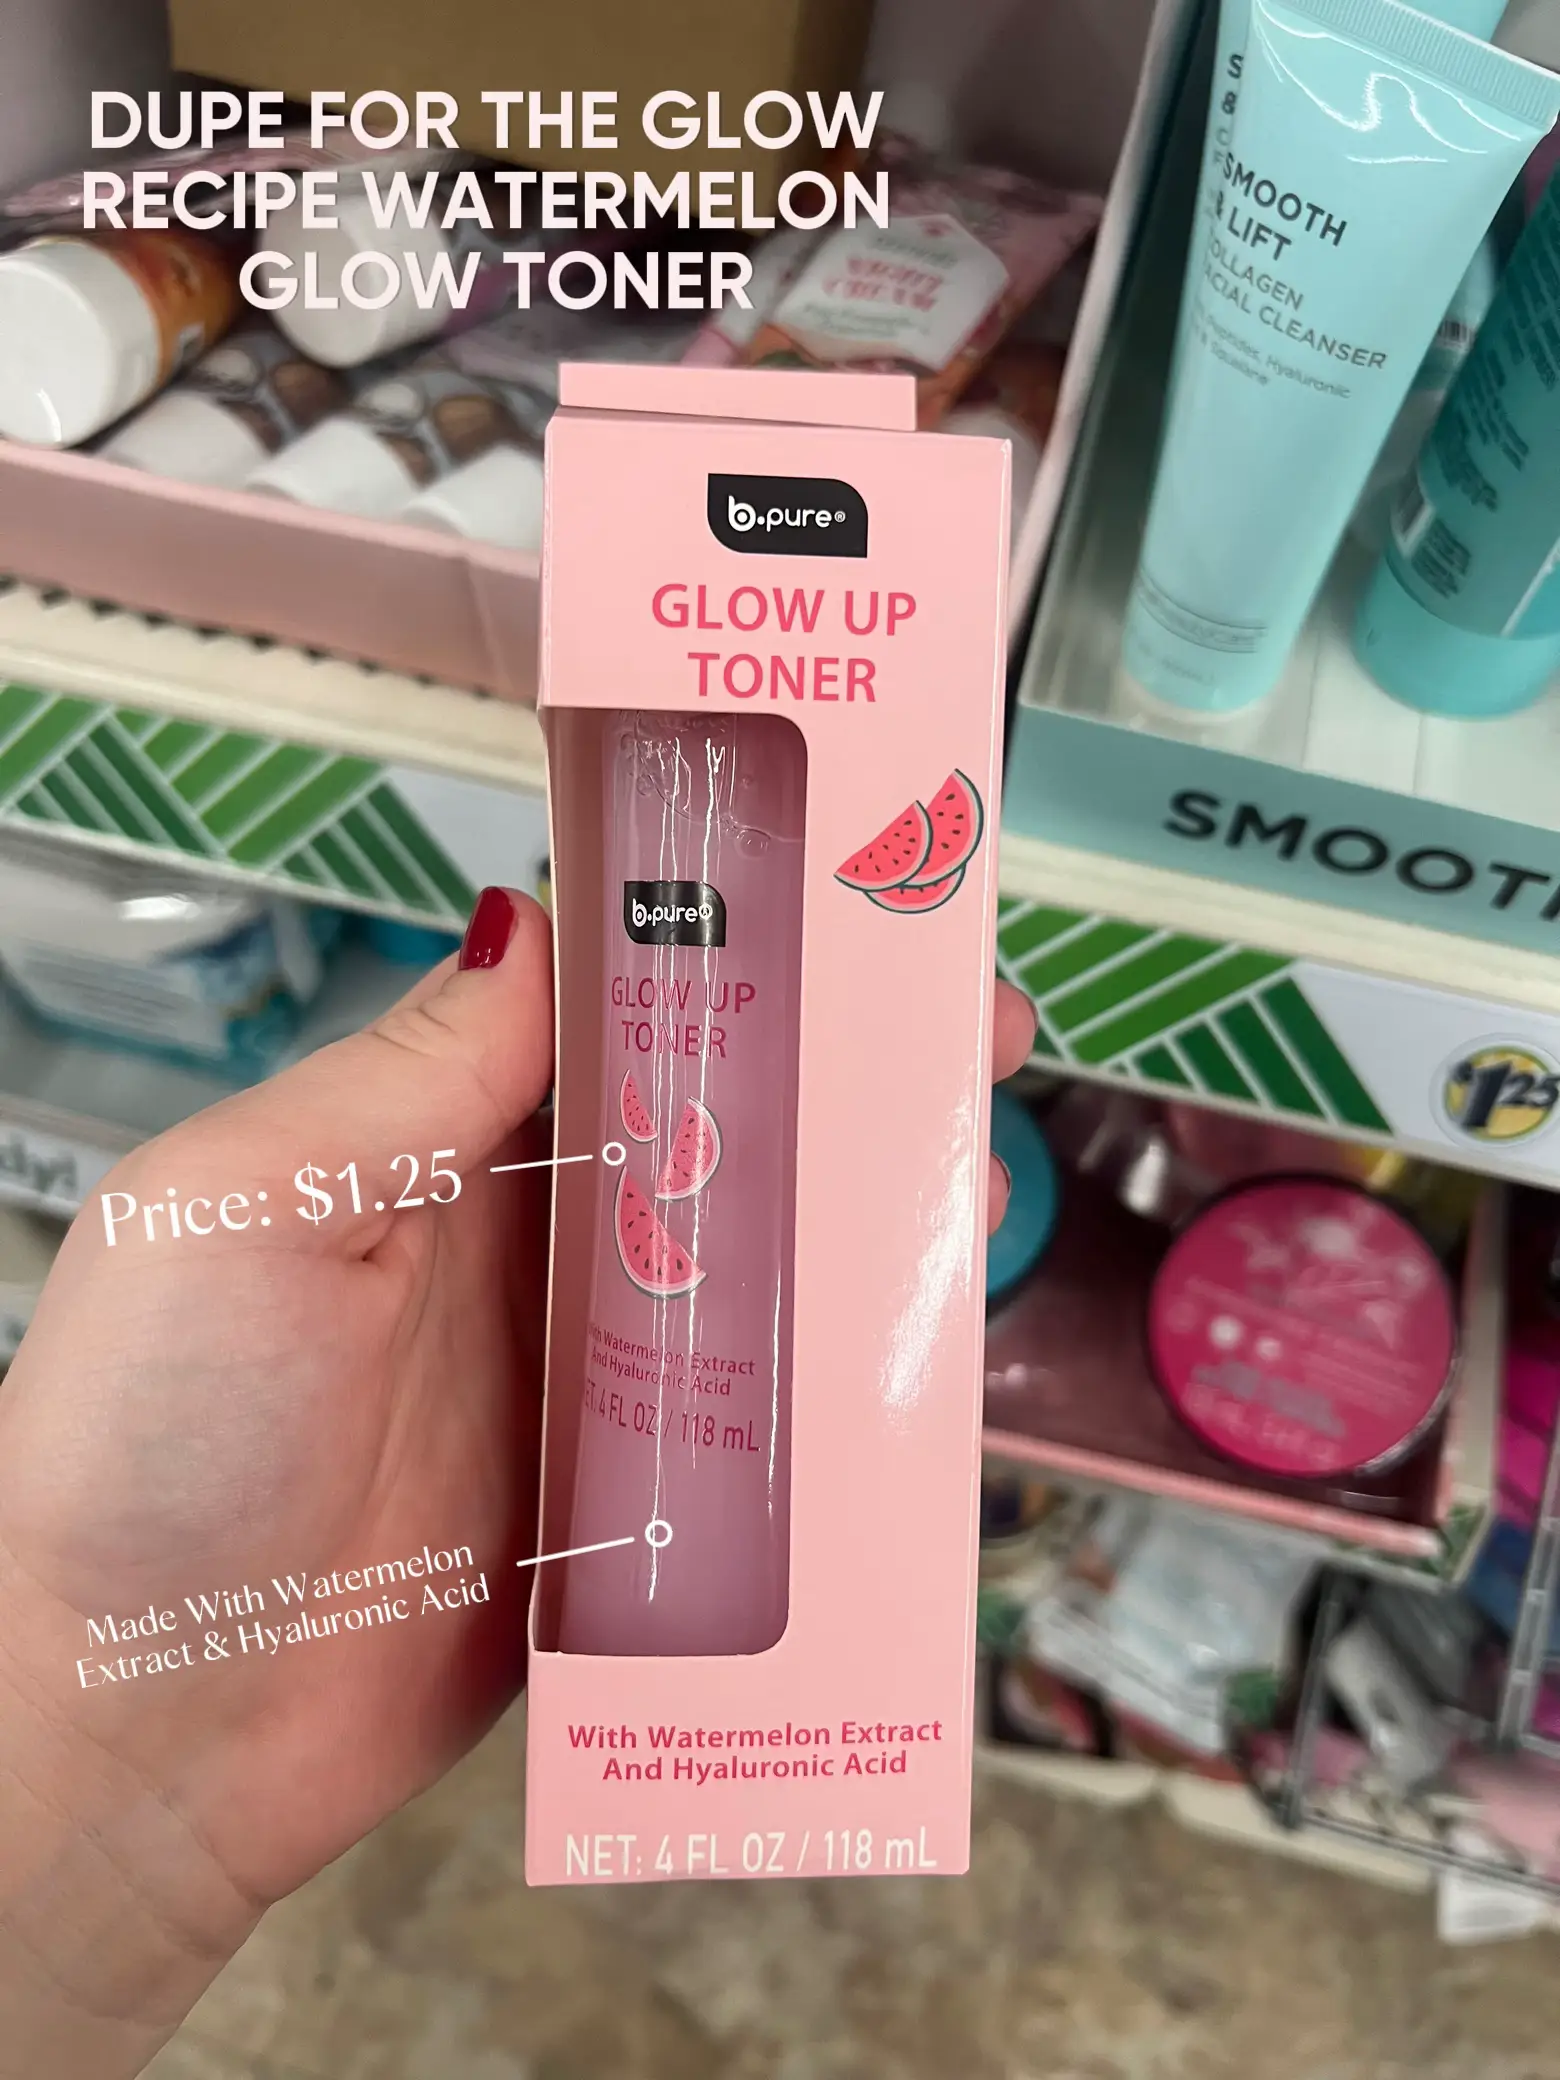 There are cherry blossom dupes at Target!!!!! 🌸 $25 each and the